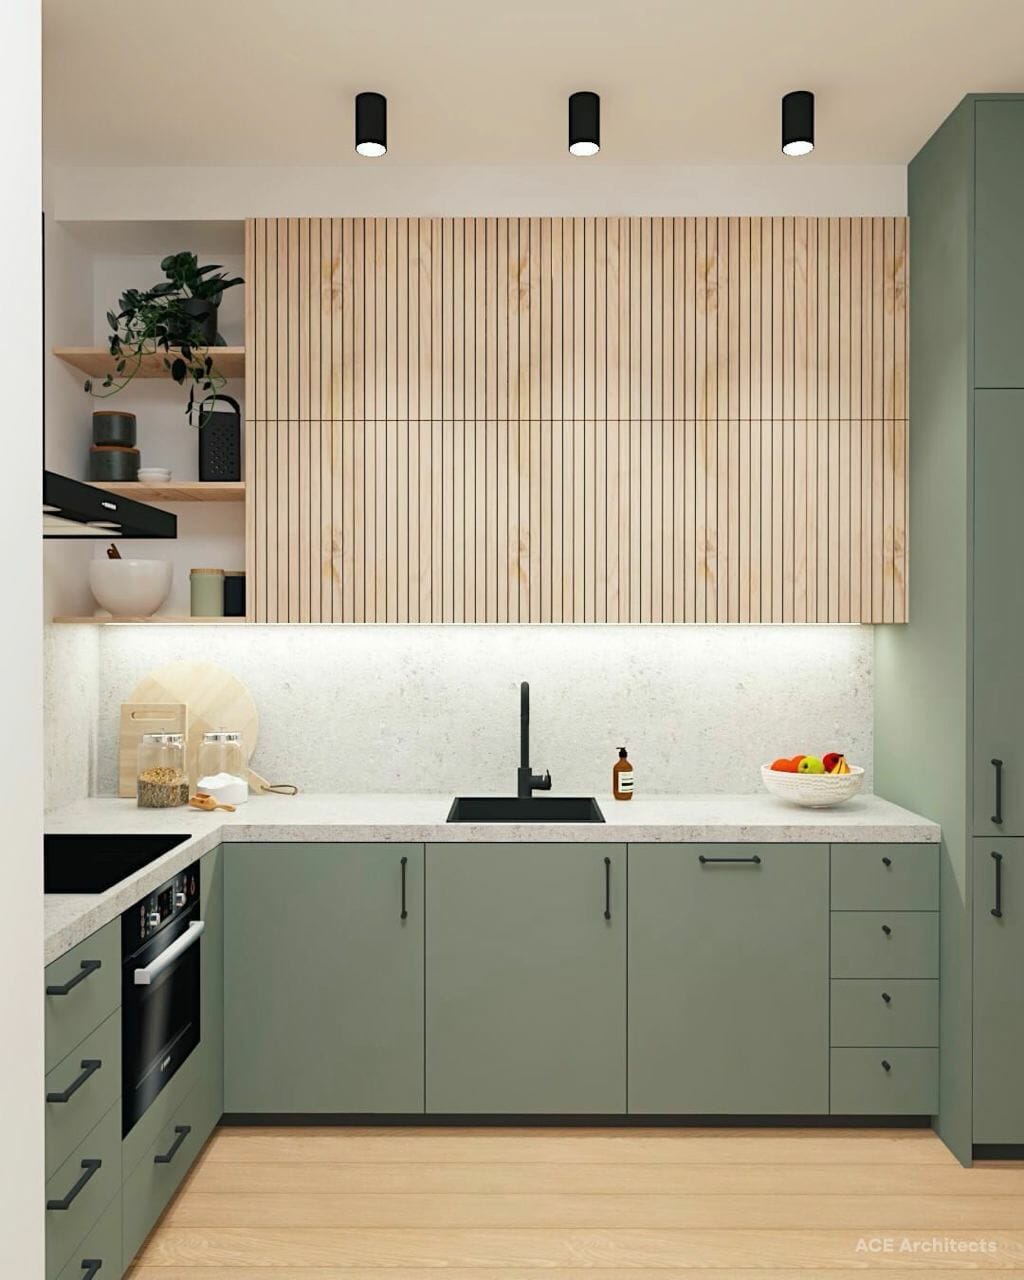 Kitchen cabinets painted blue fern green